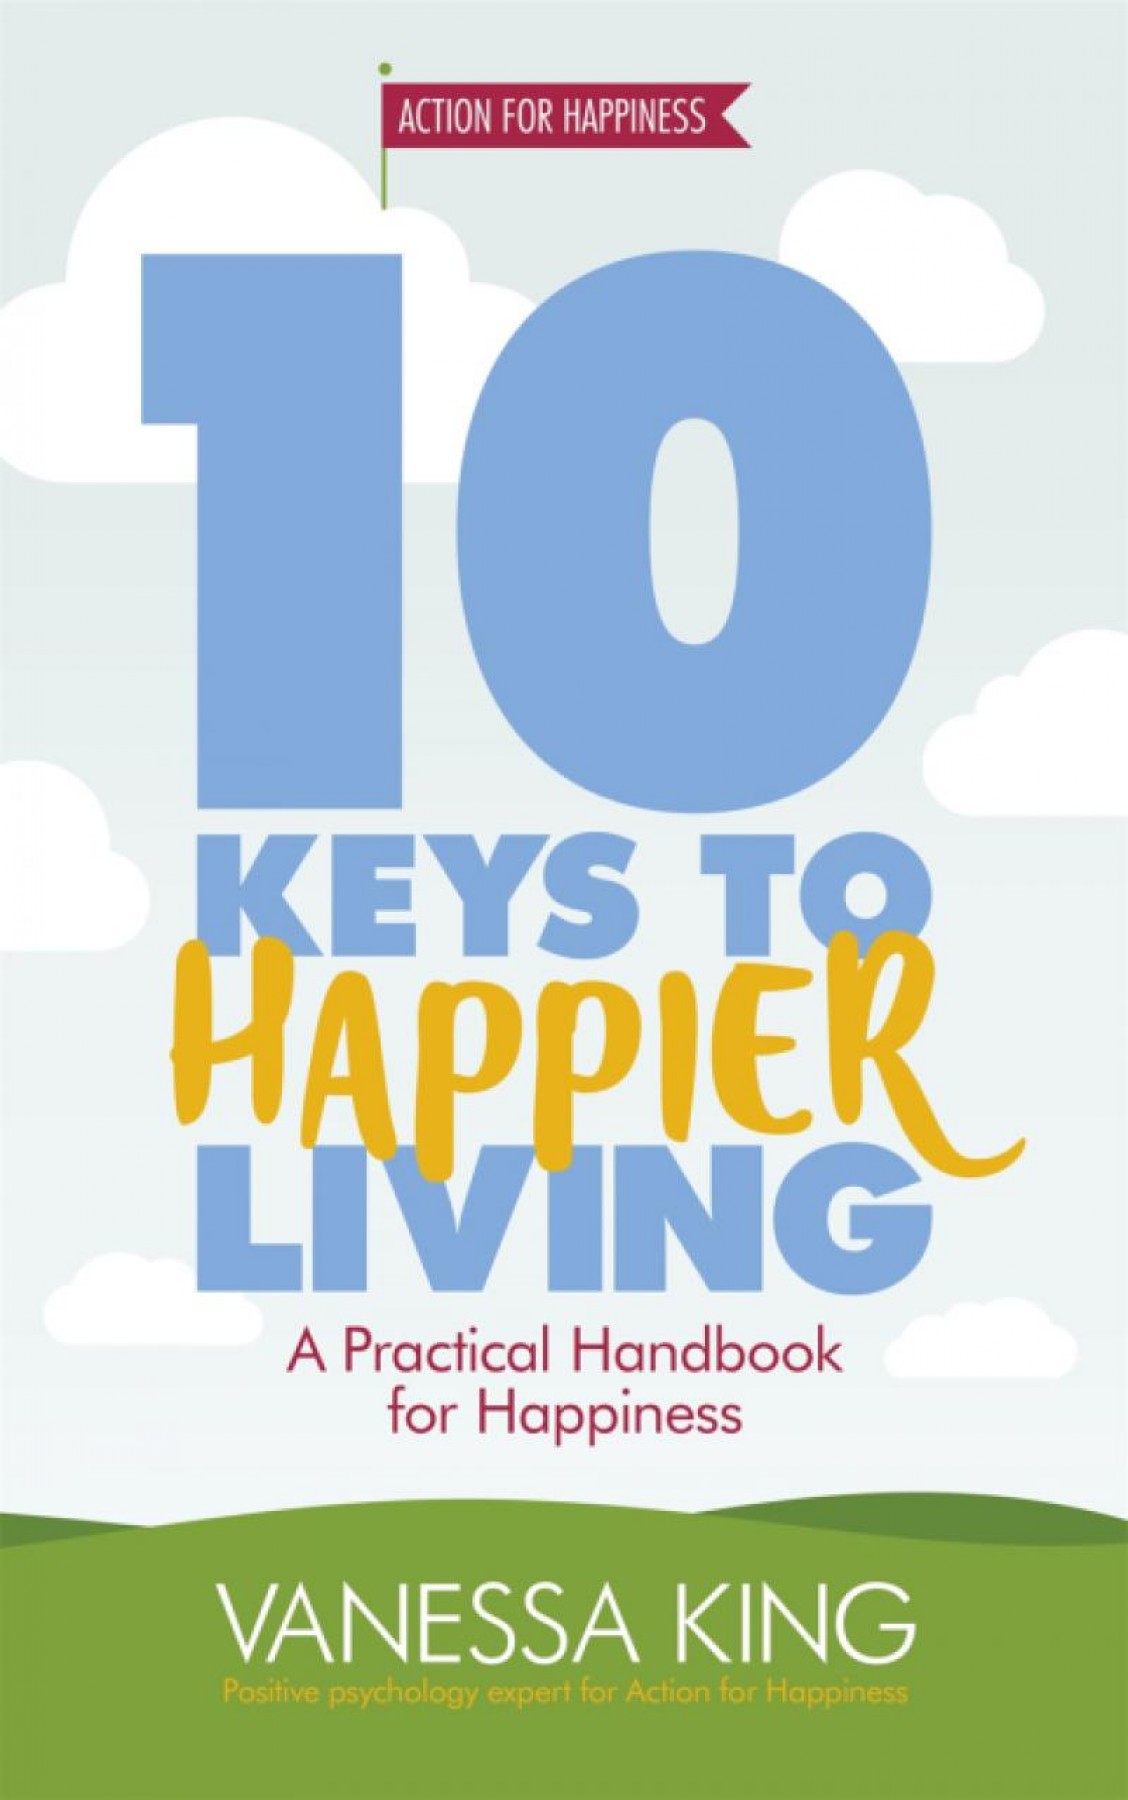 10 Keys to happier living: A practical handbook for happiness